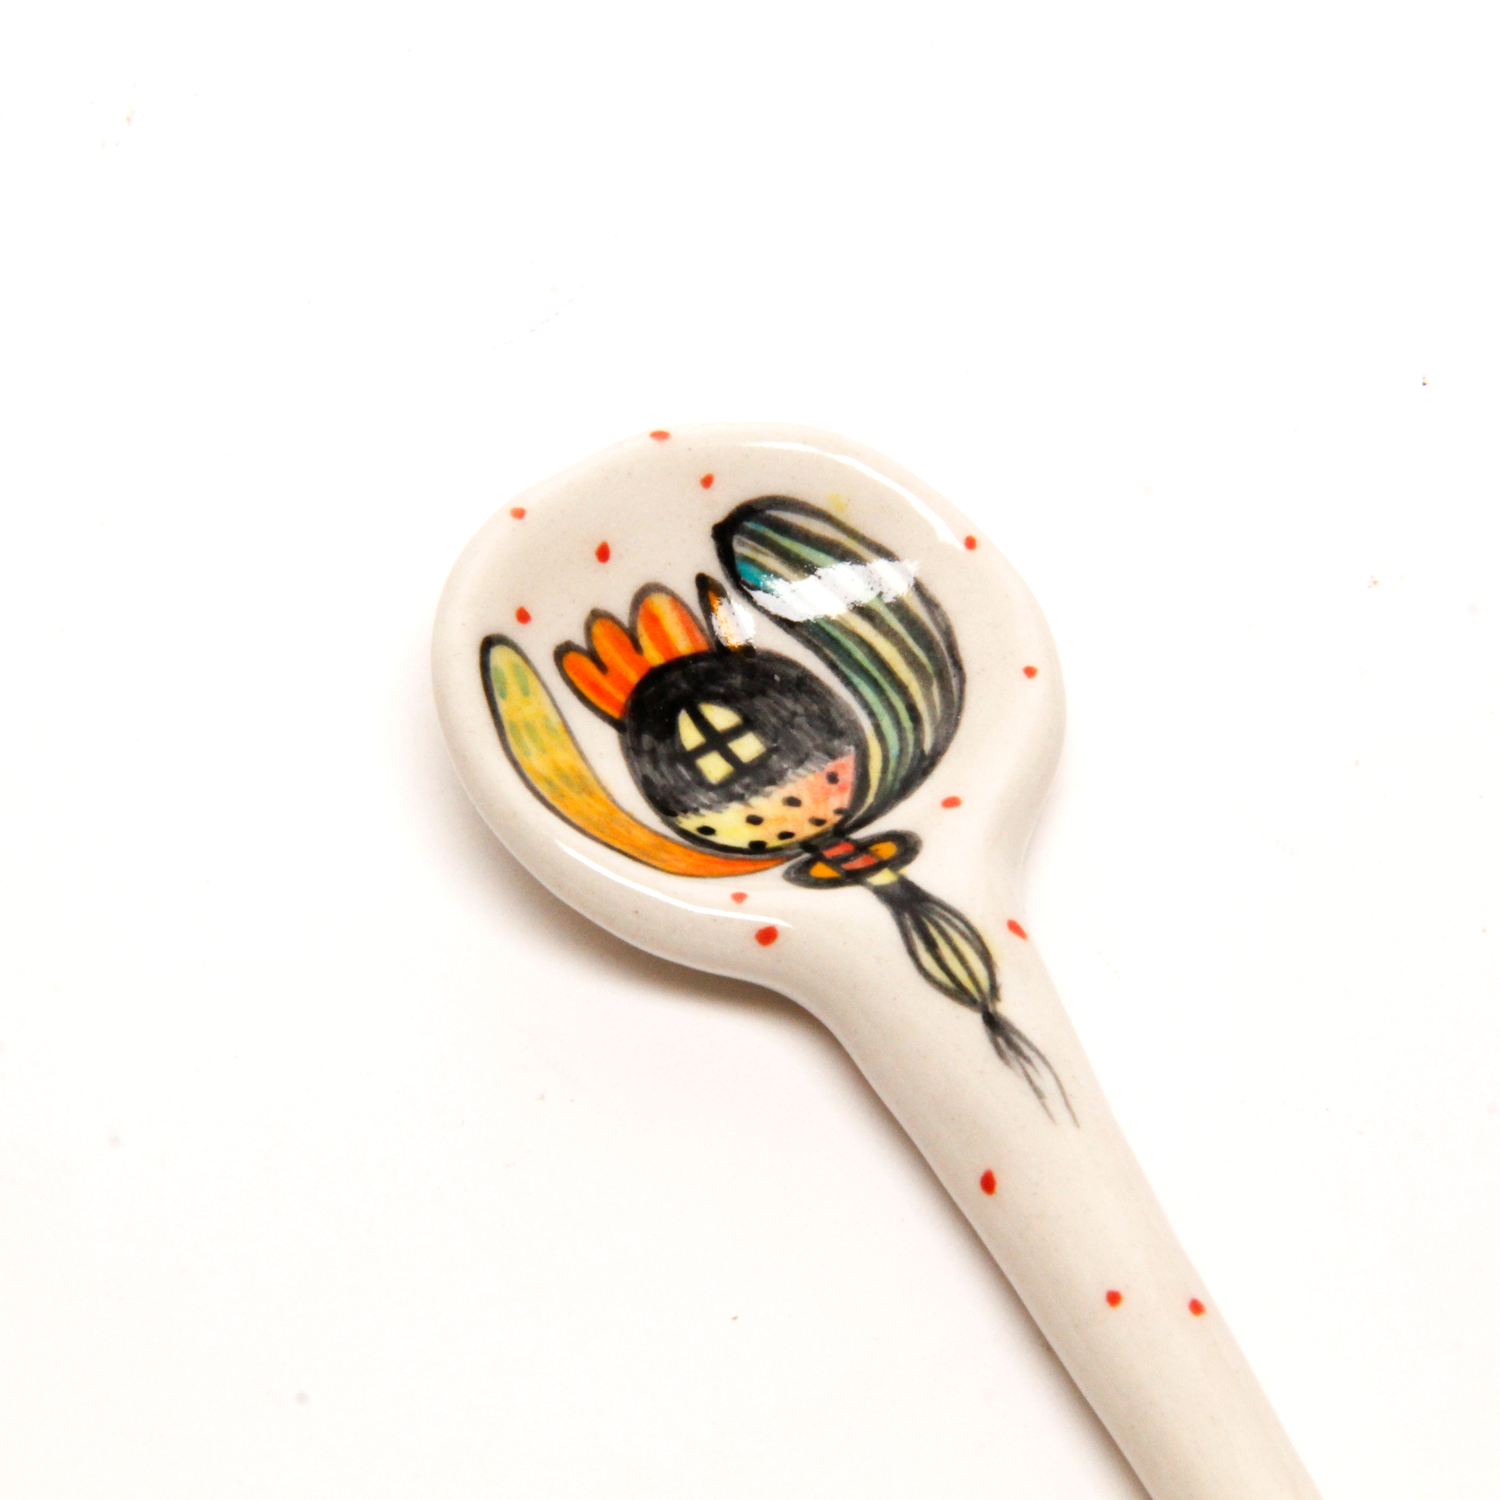 Maria Moldovan: Green House Spoon Product Image 3 of 3